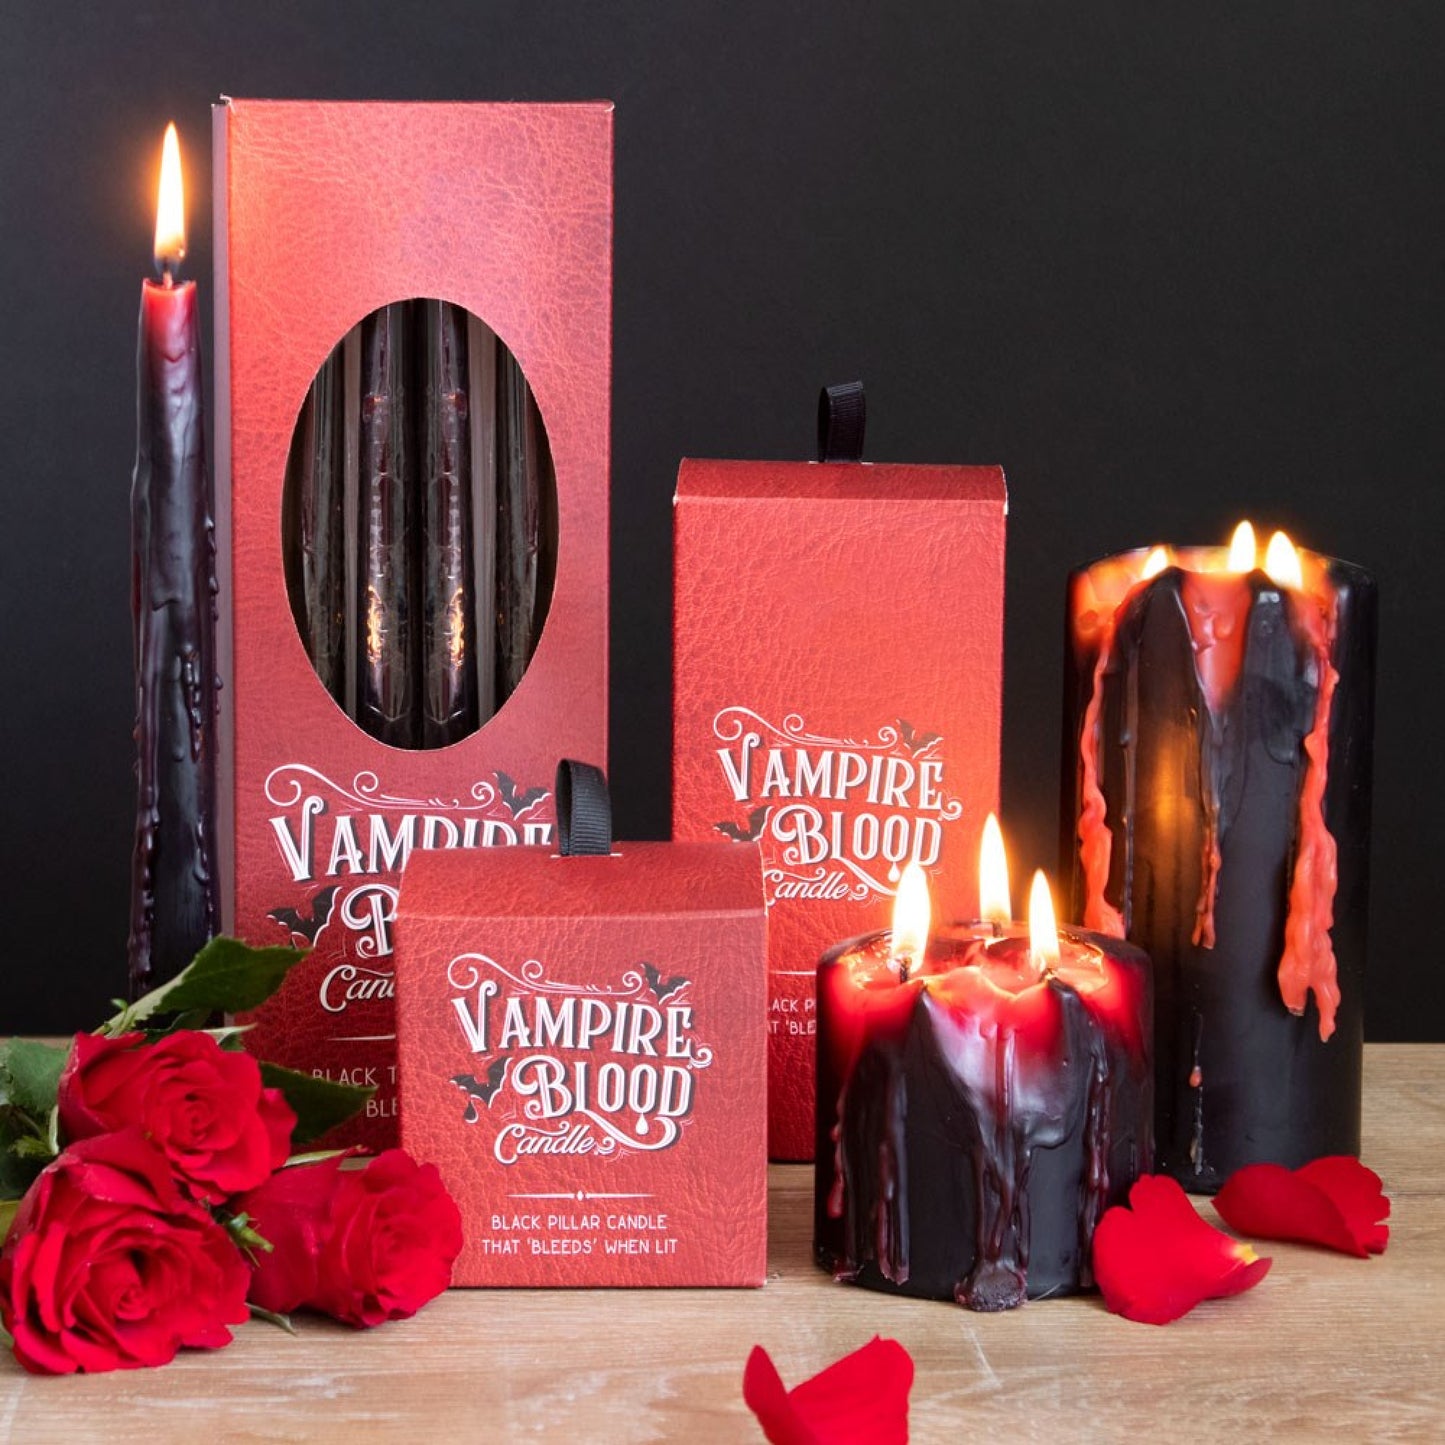 From candlelit dinners to eerie mood lighting, our large Vampire Blood pillar candle will entrance guests with its eye catching, bleeding wax effect.  Place this unique candle on an ornate pedestal holder for a truly bewitching display when the warm wax 'bleeds' down its sides.  Size: H: 15.2cm x W: 7.5cm x D: 7.5cm  Approximately 7 hour total burn time.